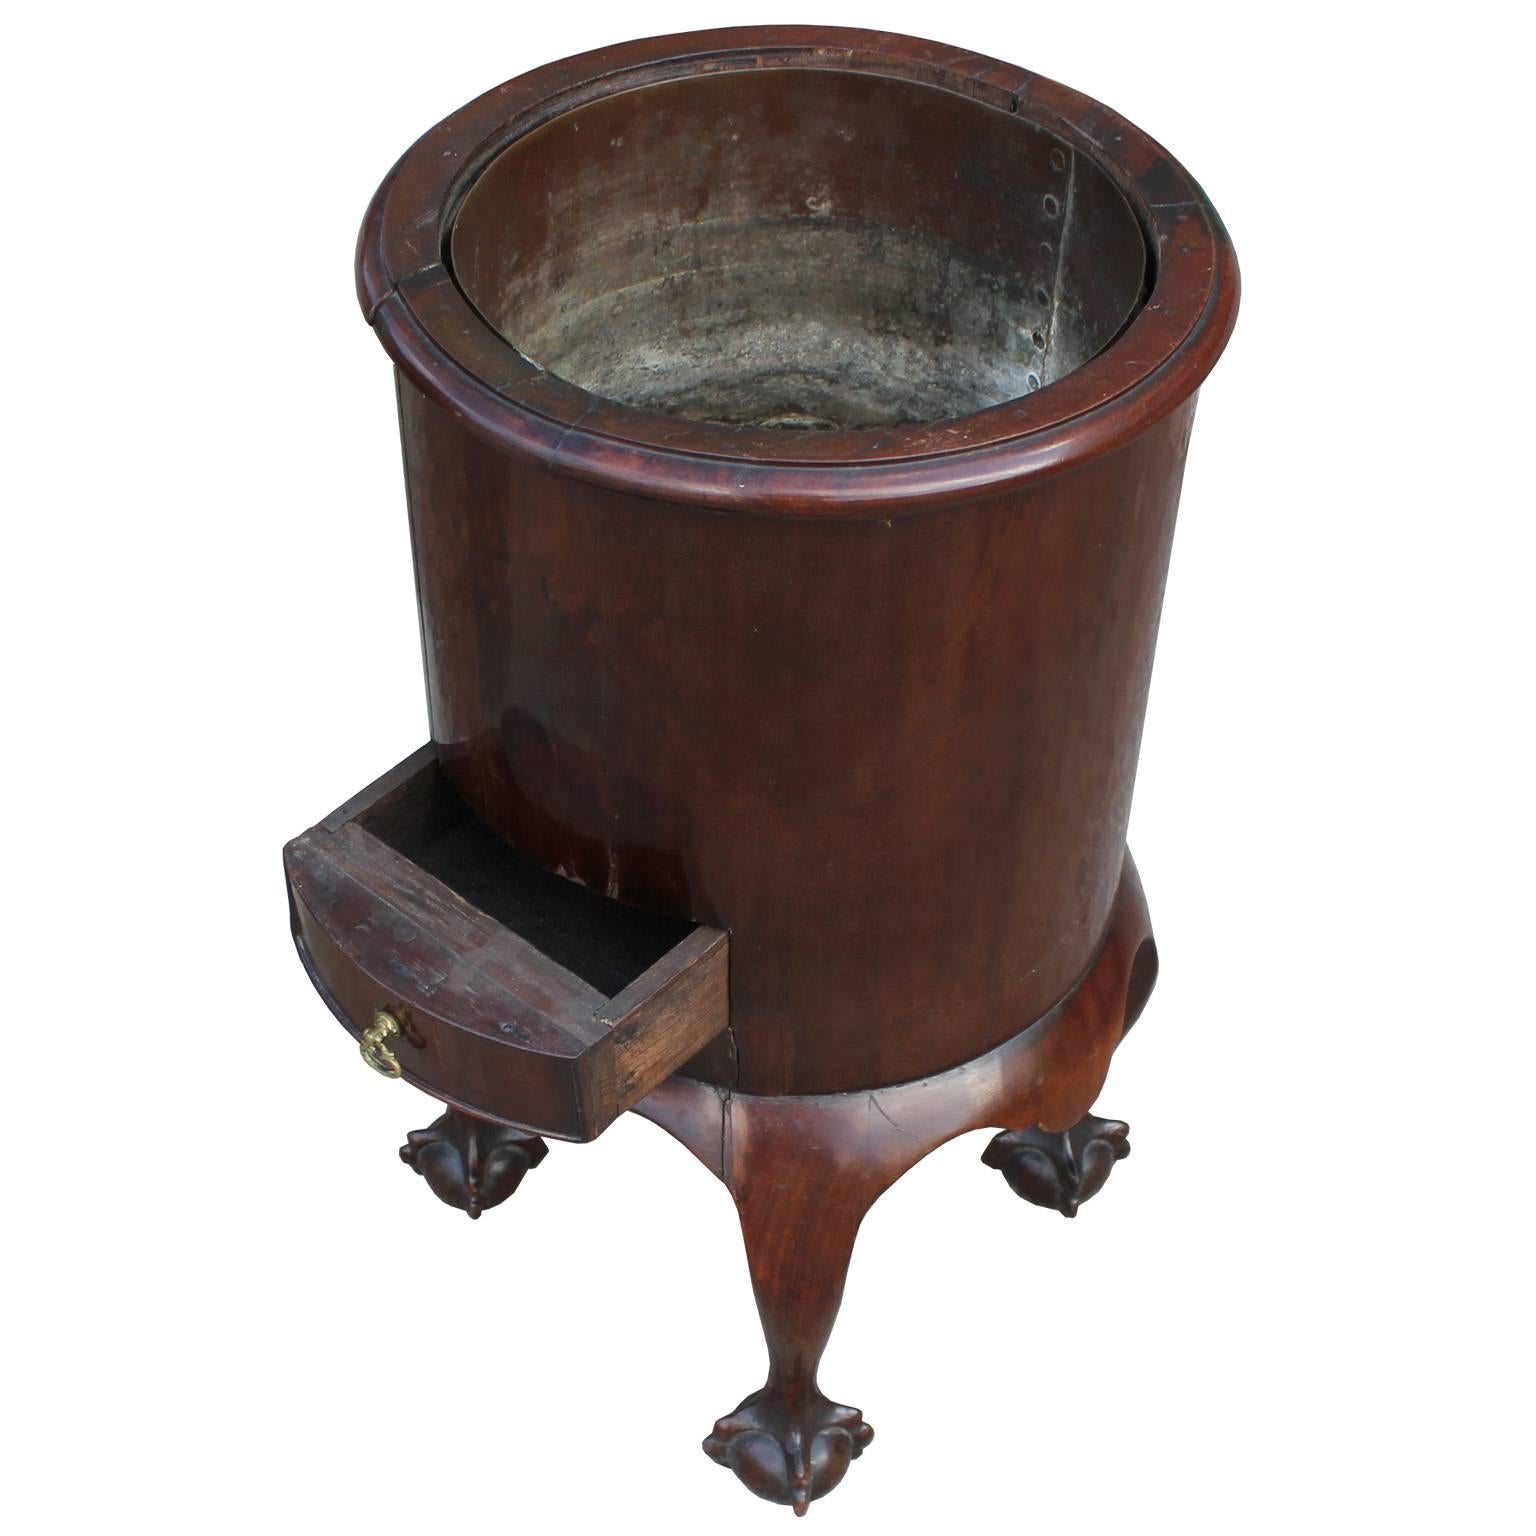 Elegant 18th century wine cooler. English caddy has beautiful lines and craftsmanship with claw and ball feet. A single drawer accented with a brass pull provides storage for wine accessories. Made from a wonder full cut of crotch mahogany.